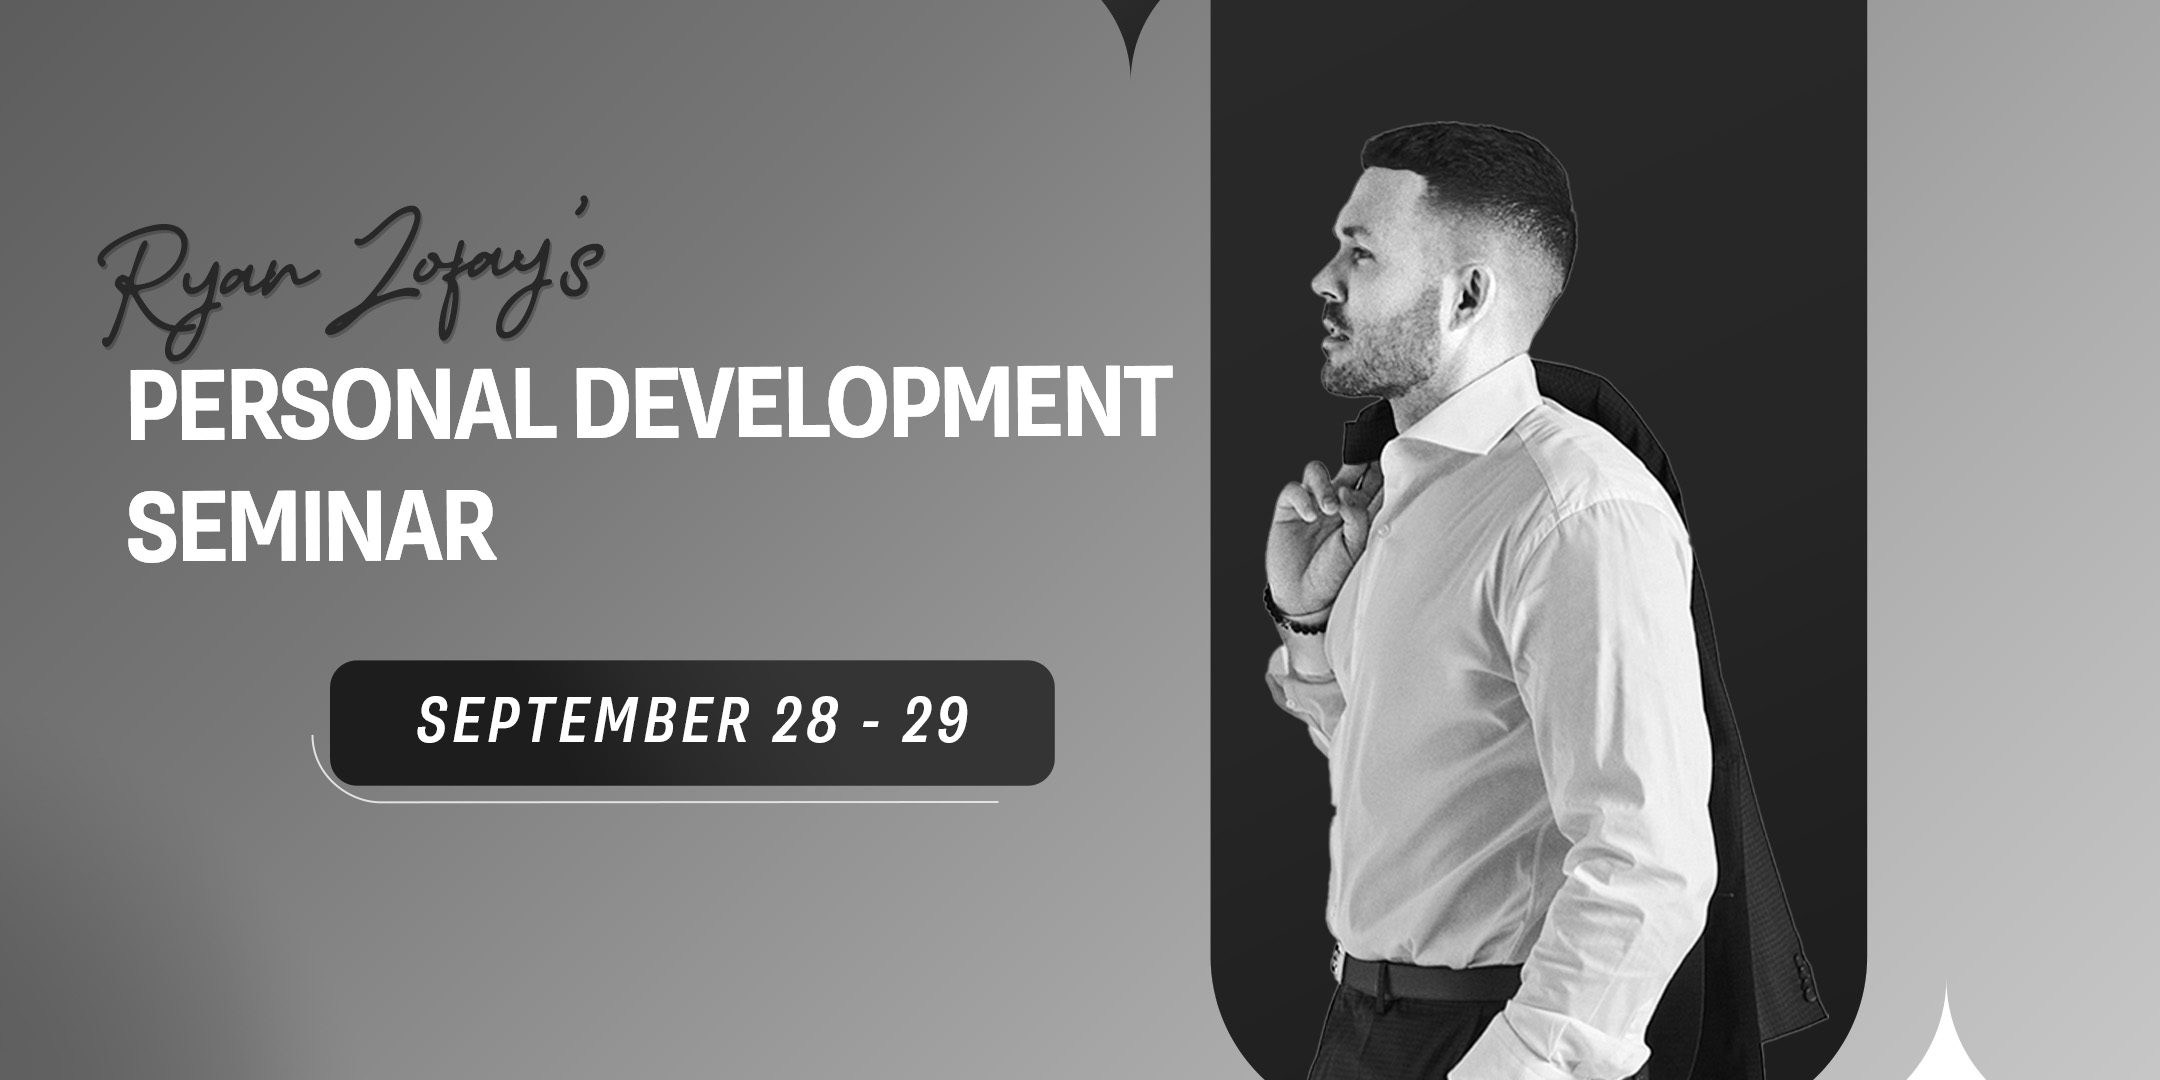 Join the Ryan Zofay personal development weekend workshop on September 28-29.